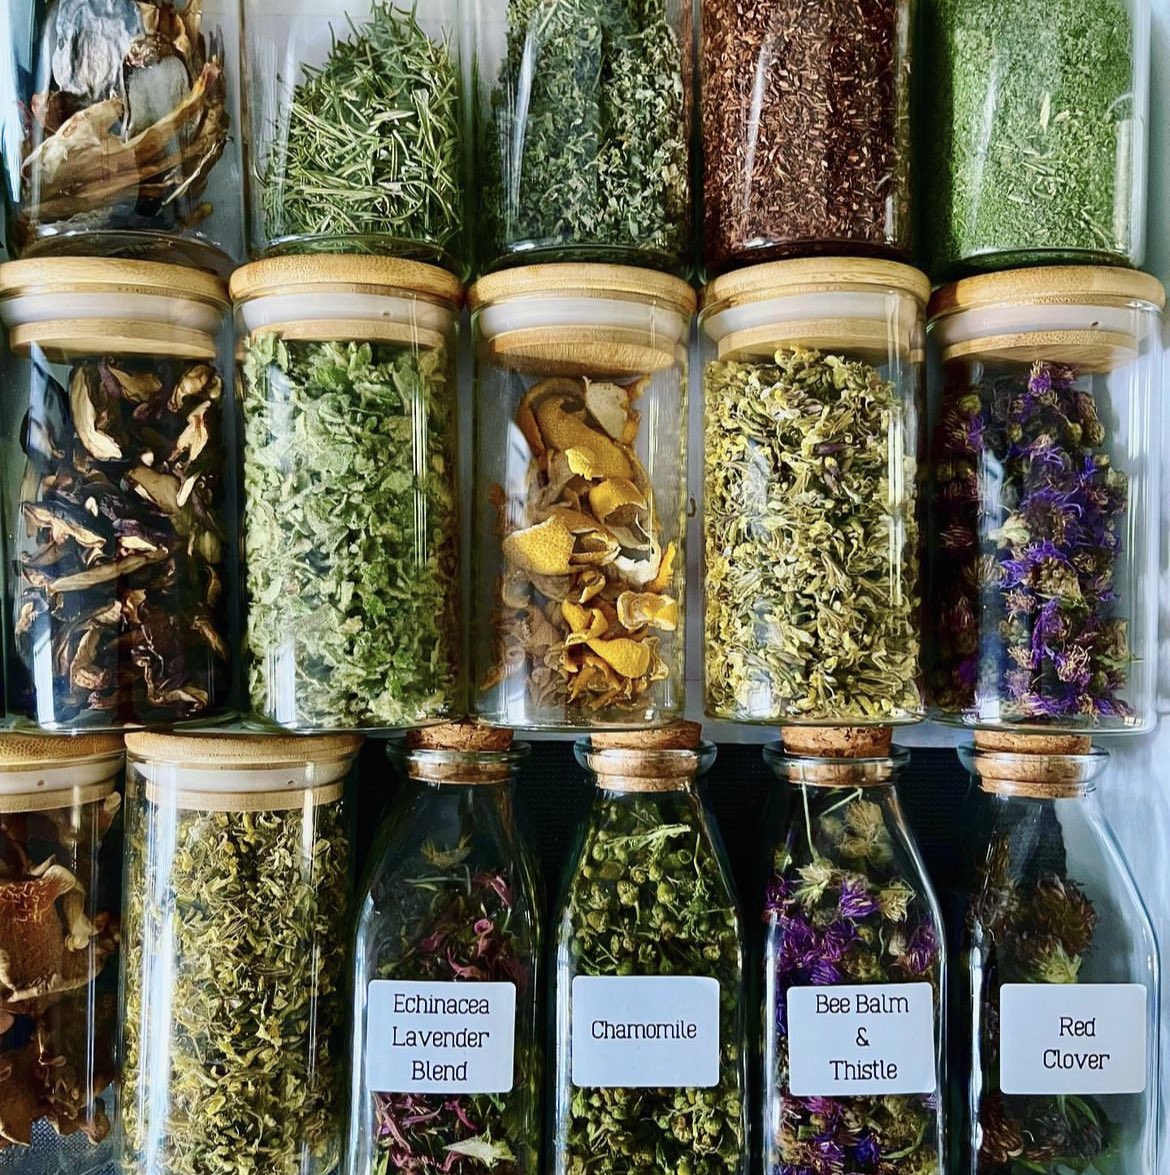 Our small drawer is full of dried herbs, flowers, mushrooms and peels. Hopefully one day we’ll be able to dedicate an entire pantry to our dried goodies!

#foragedfood #foragedflowers #gardengrown #driedherbs #sustainableliving #godisgood